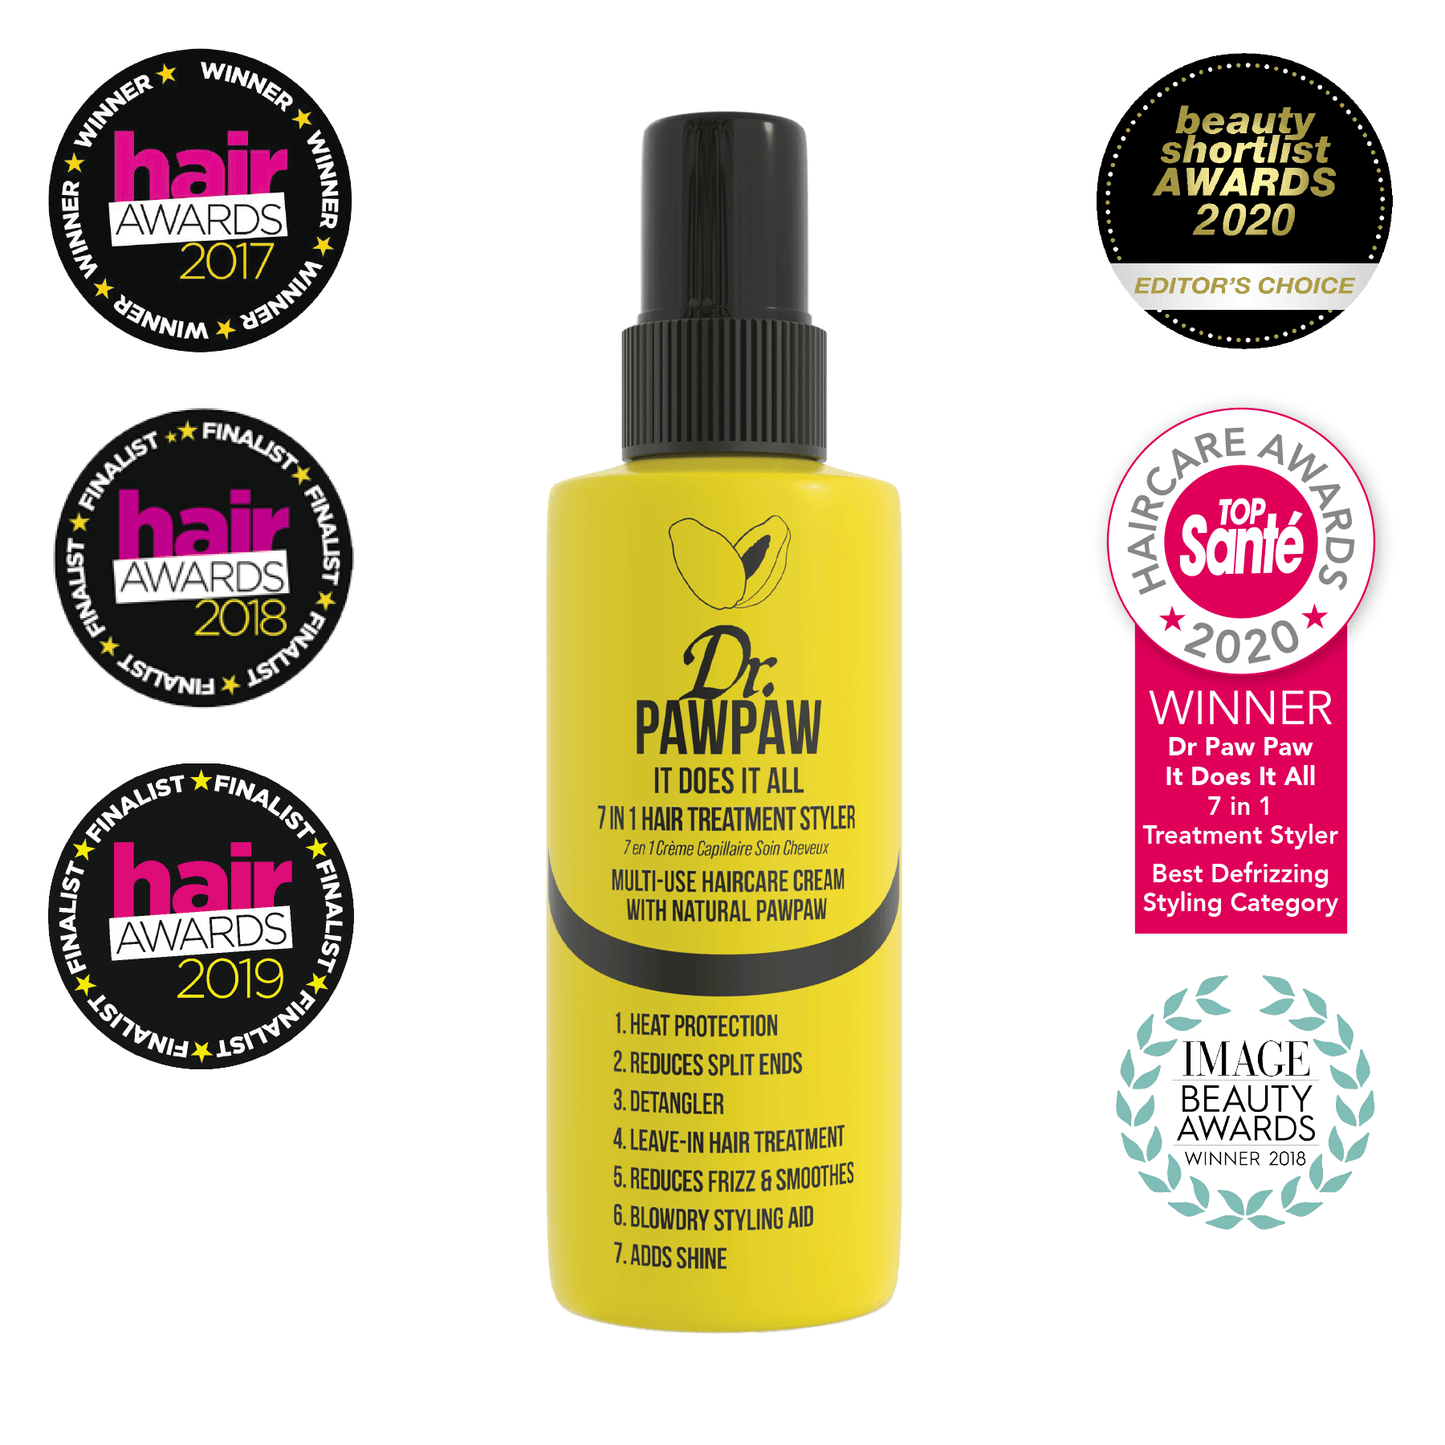 It Does It All - 7 in 1 Hair Treatment Styler 100ml - Dr Paw Paw